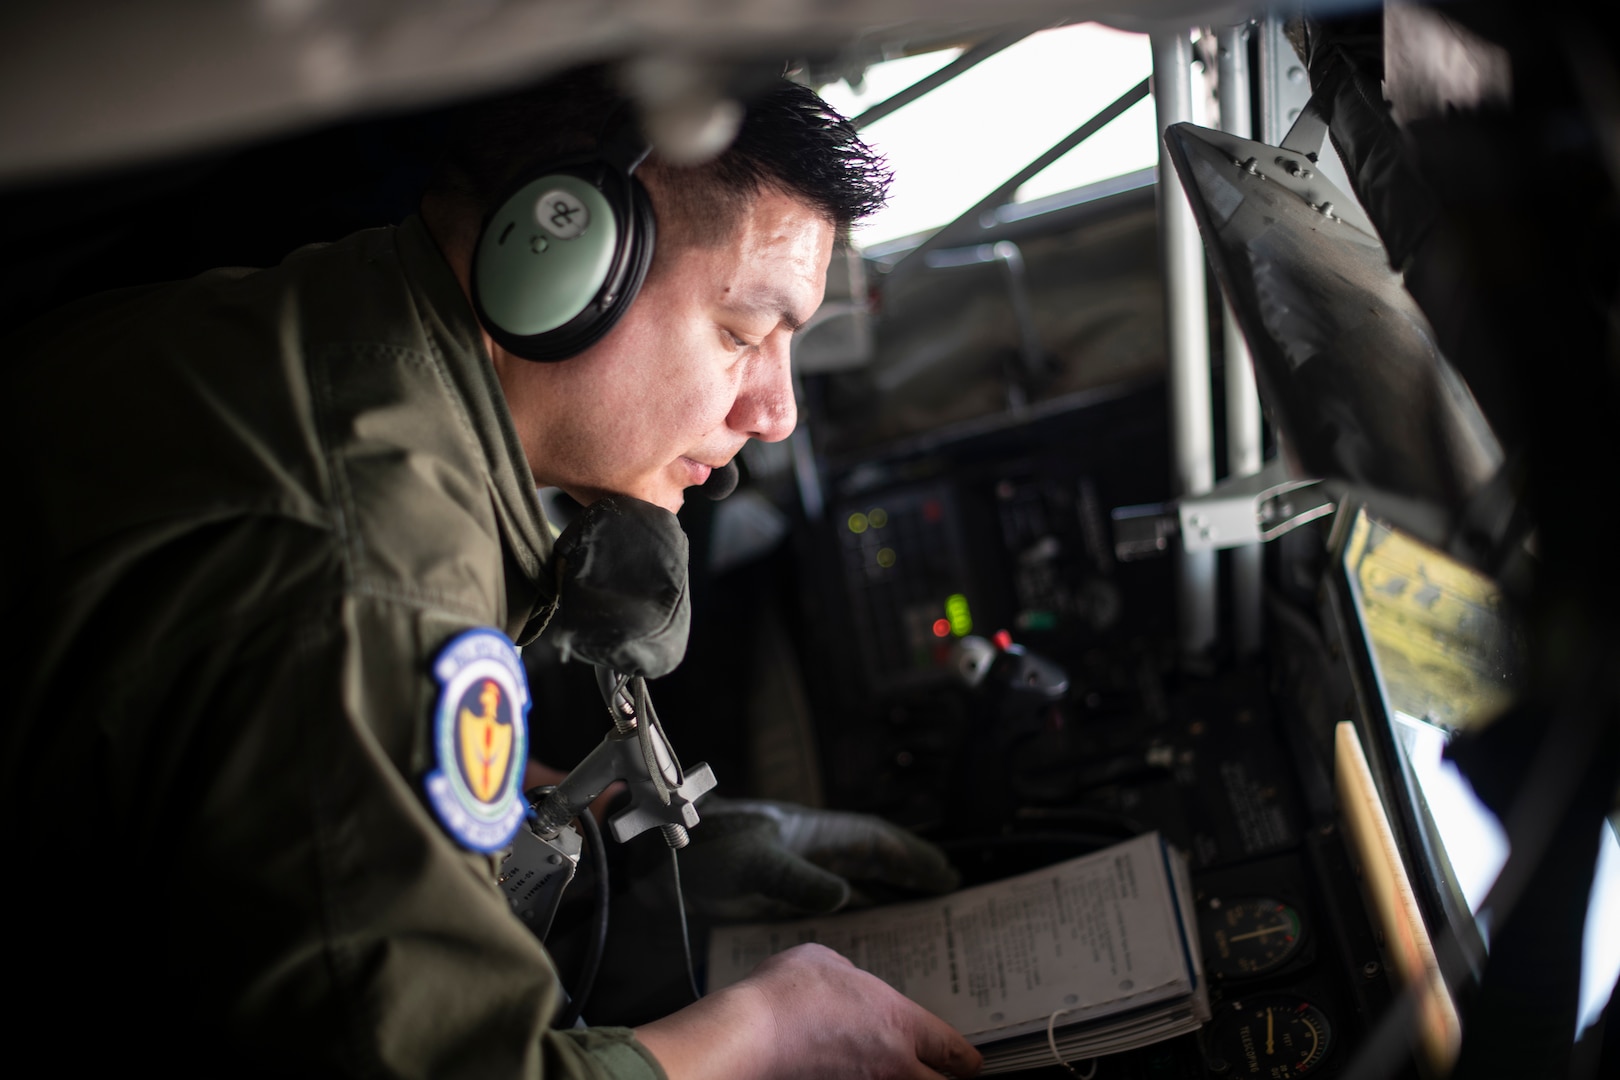 Senior Airman David Rodriquez, 351st Air Refueling Squadron boom operator, reviews a checklist prior to a flight supporting a strategic bomber mission at RAF Mildenhall, England, May 7, 2020. Strategic bomber missions familiarize aircrew with air bases and operations in different Geographic Combatant Command’s areas of operations.